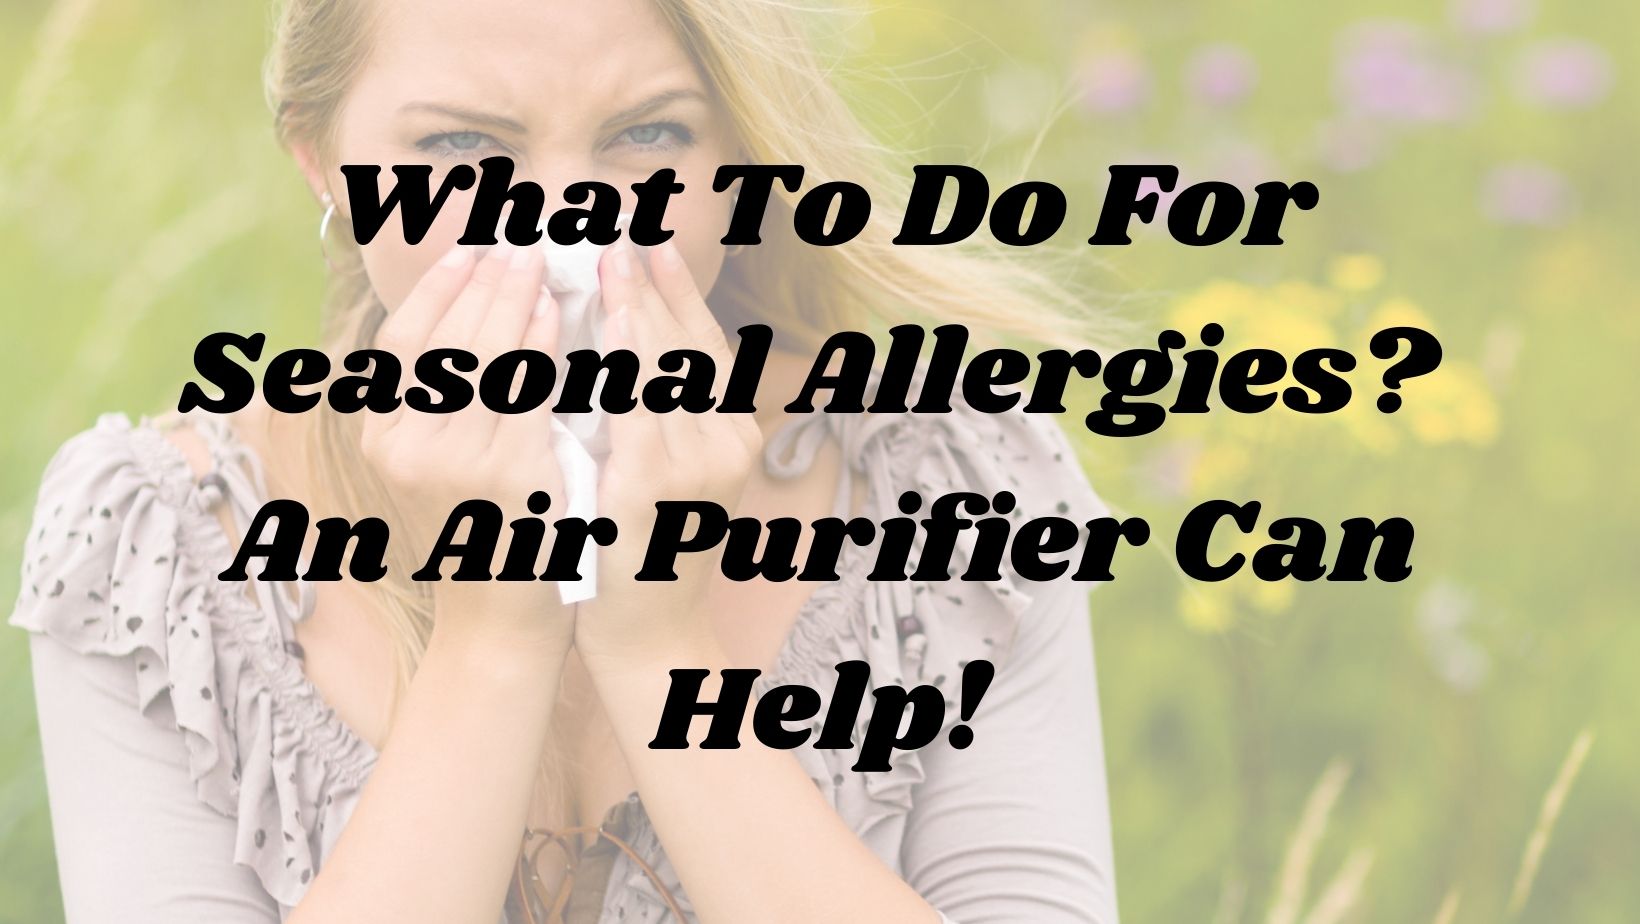 What to do for Seasonal Allergies - Featured Image